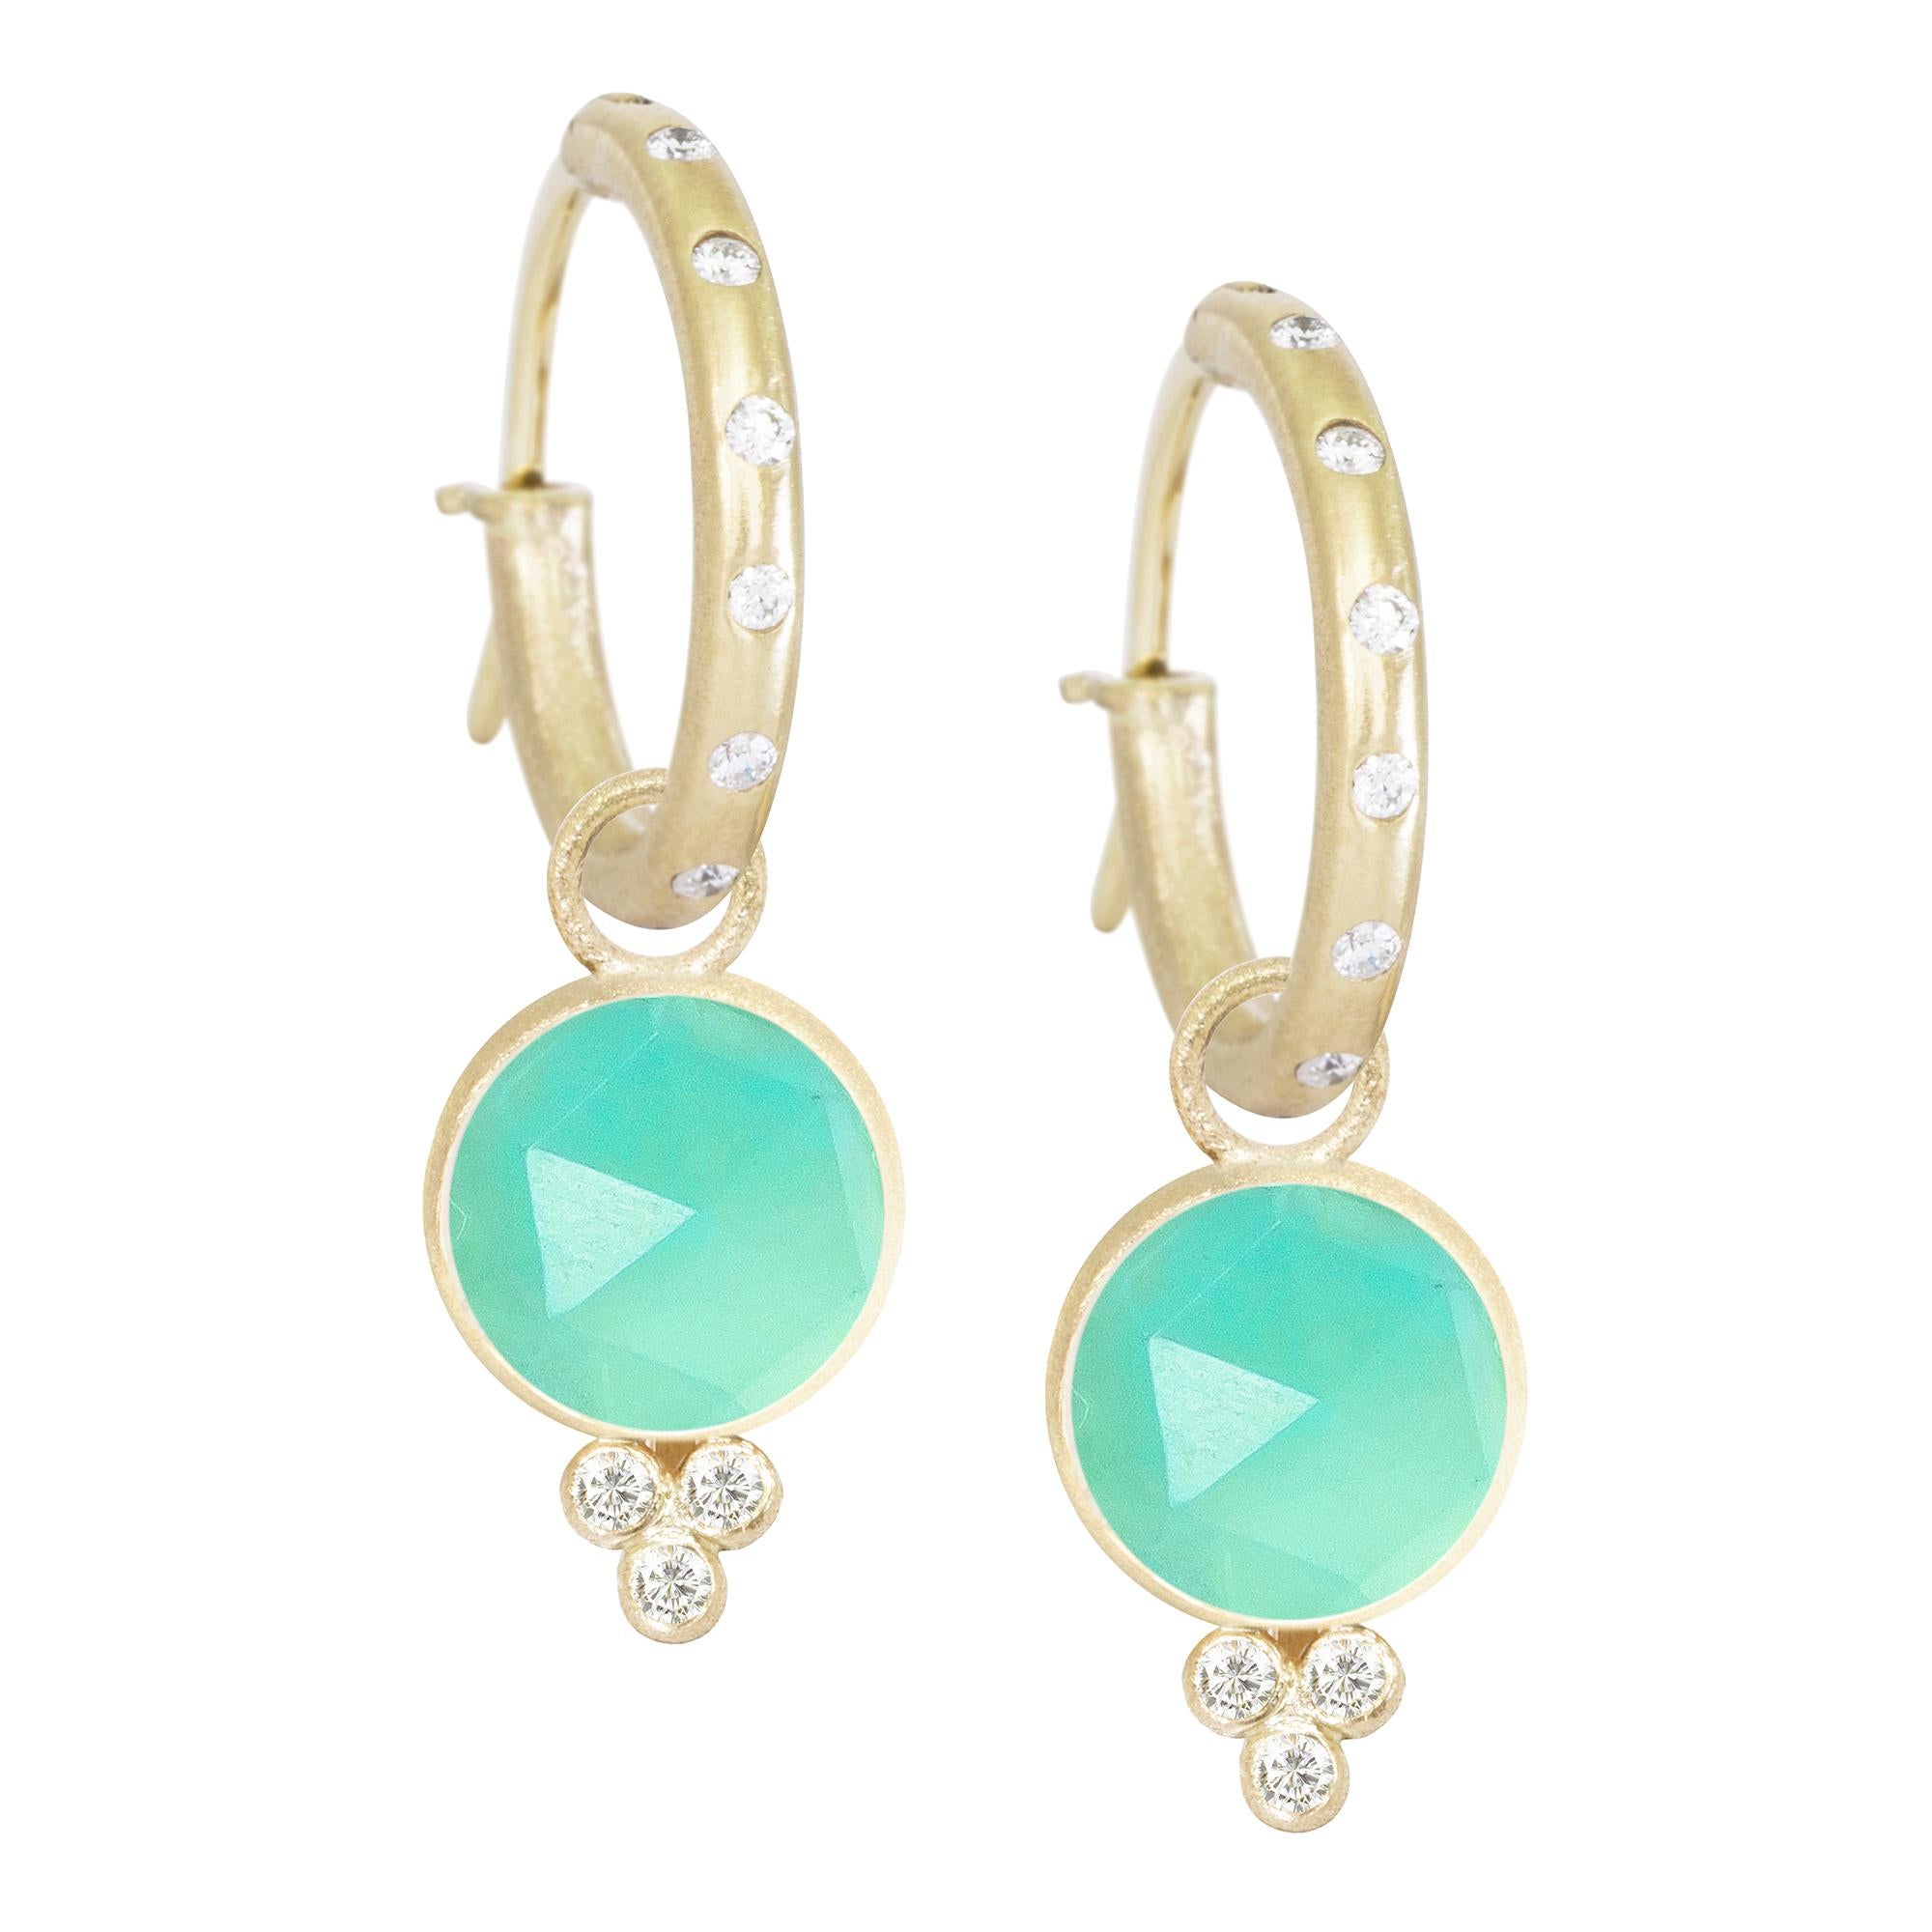 A Nina Nguyen classic to collect and treasure: Our diamond-accented Chloe Gold Charms are designed with chrysoprase rimmed in gold. They pair with any of our hoops and mix well with other styles.

Metal: 18K Yellow Gold
Stone carat: 7
Diamond carat: